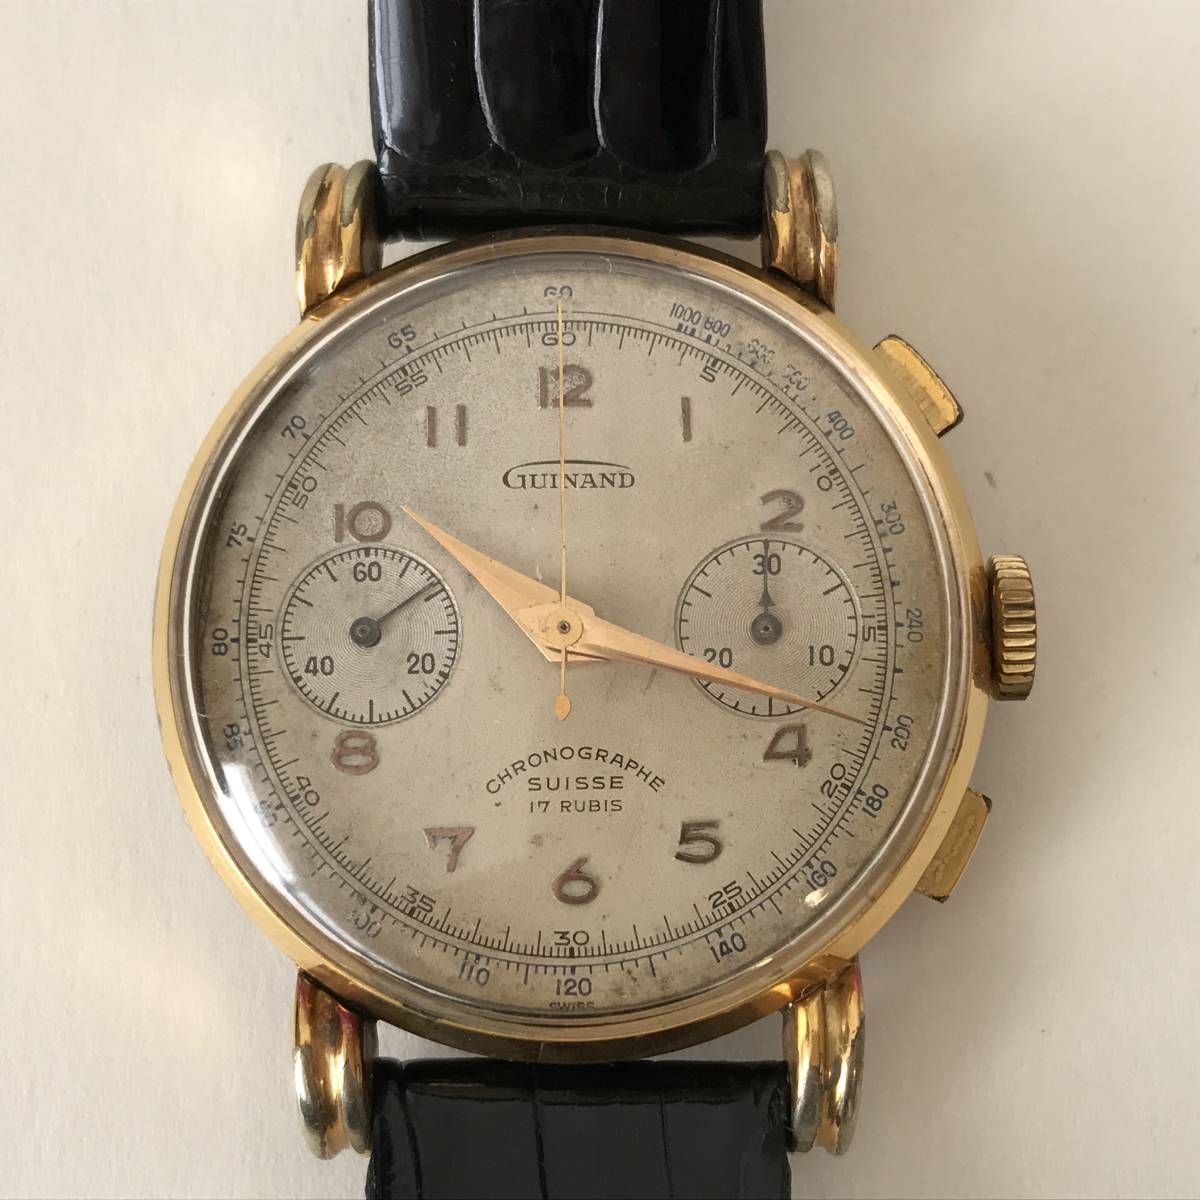 ③ GUINAND ギナーン クロノグラフ 腕時計 CHRONOGRAPHE SUISSE 17 RUBIS スイス 手巻き ヴィンテージ アンティーク vintage watch 動作品_画像2